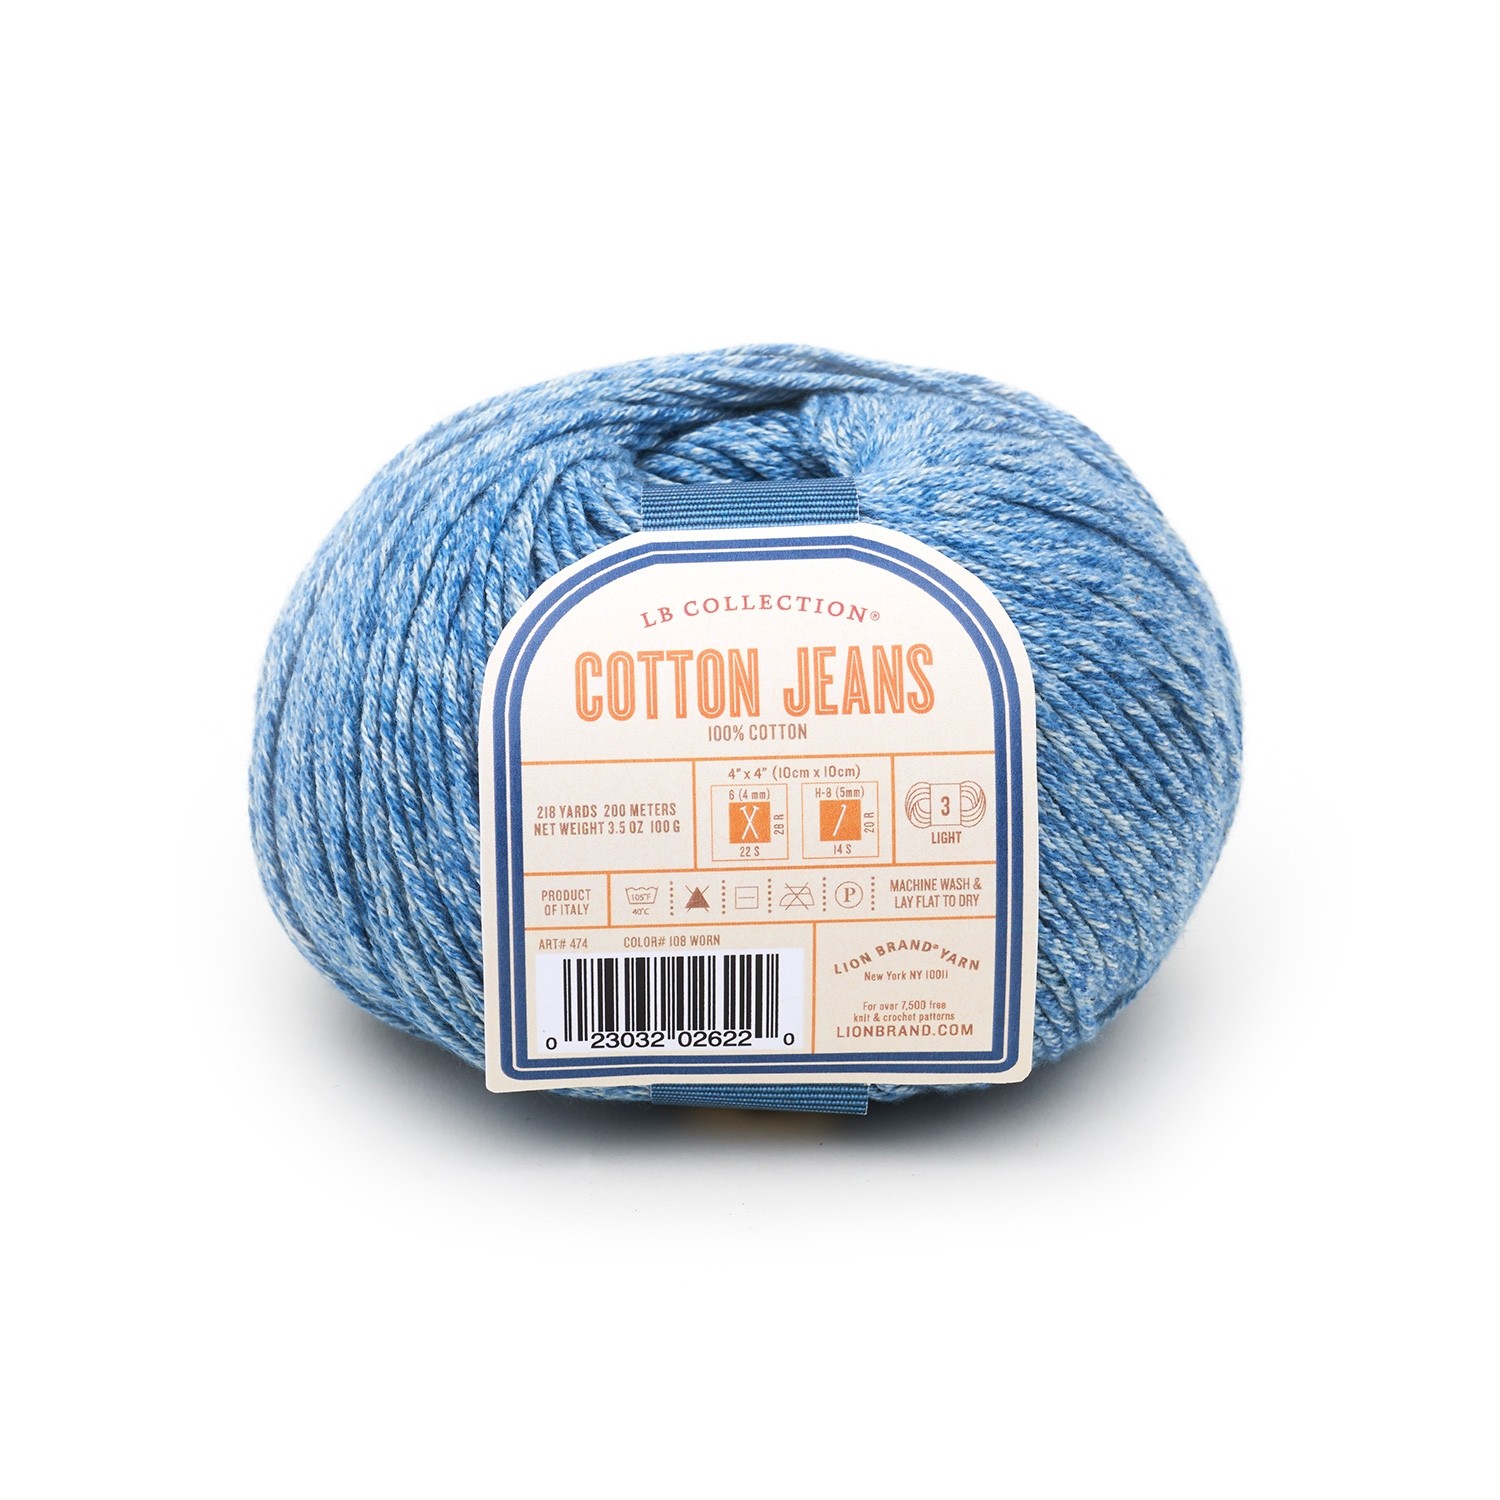 LB Collection Cotton Jeans Yarn